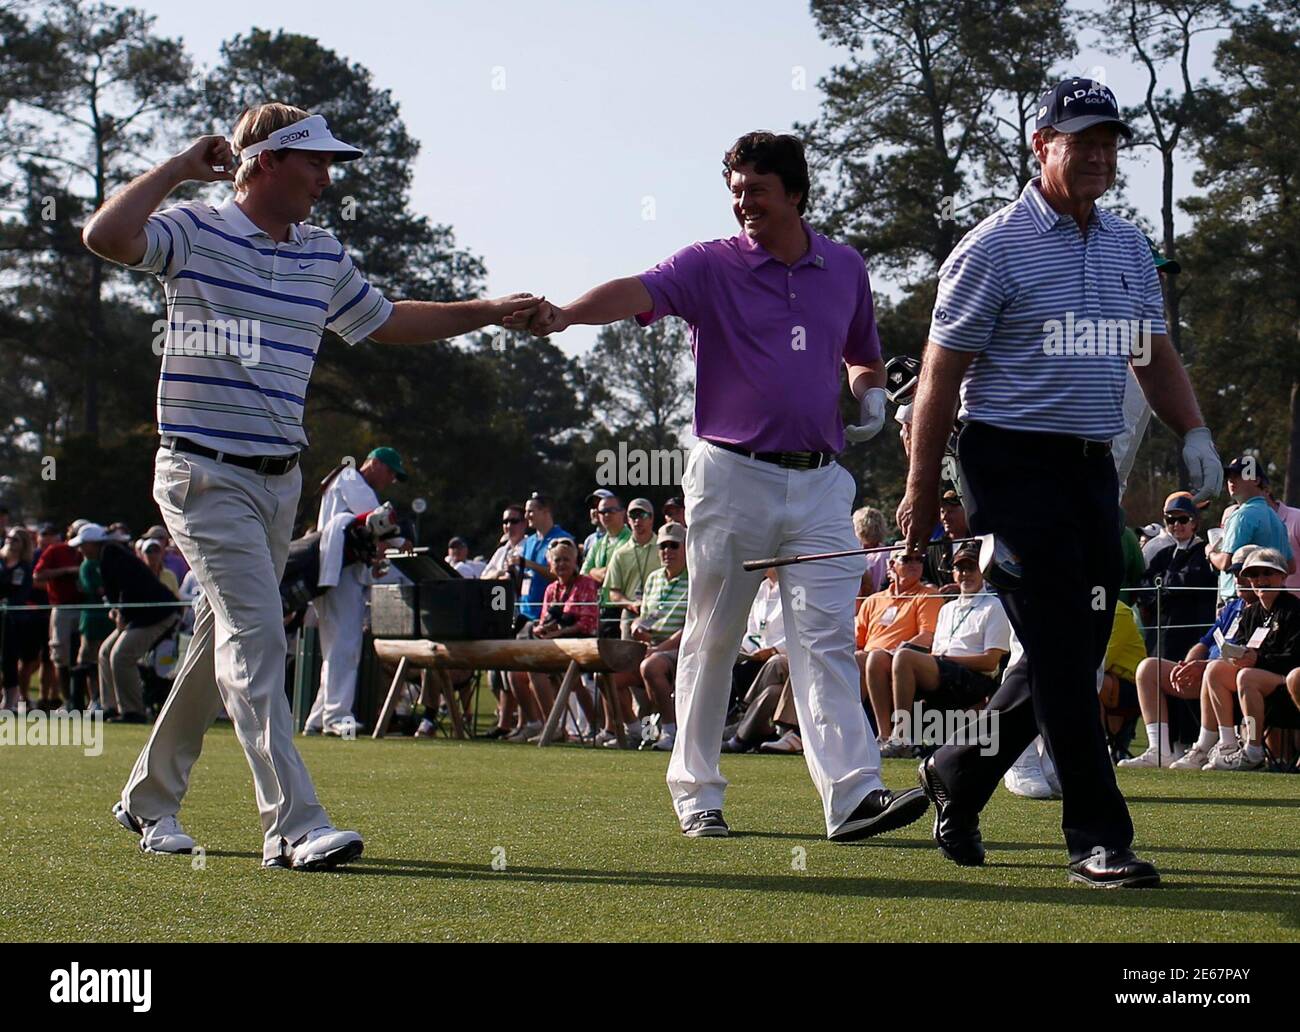 Former champion Tom Watson of the U.S. (R) walks in front of amateurs  Russell Henley (L) and Nathan Smith of the U.S. as they congratulate  themselves after their drives on the first